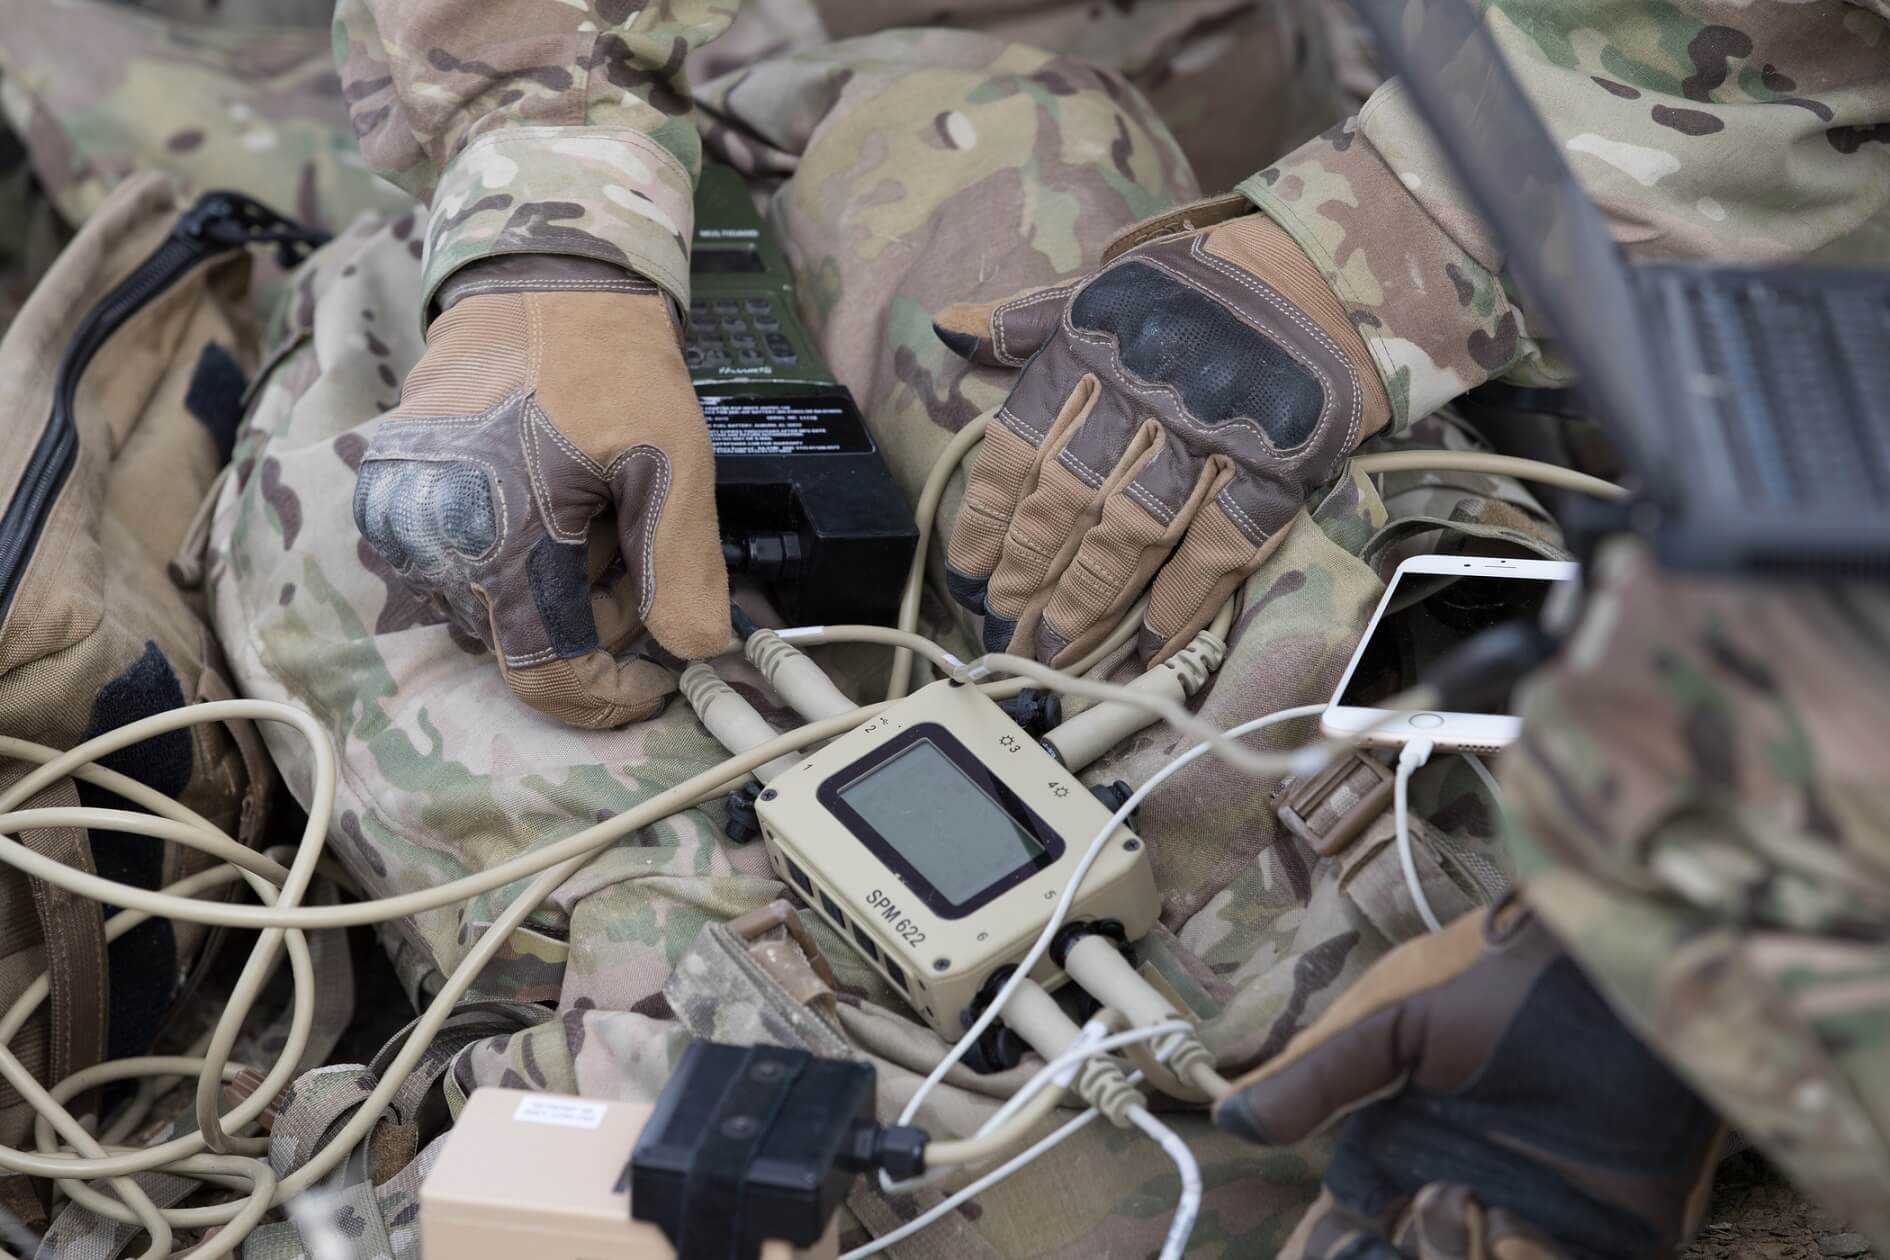 ZEV Technologies Small Frame - Soldier Systems Daily